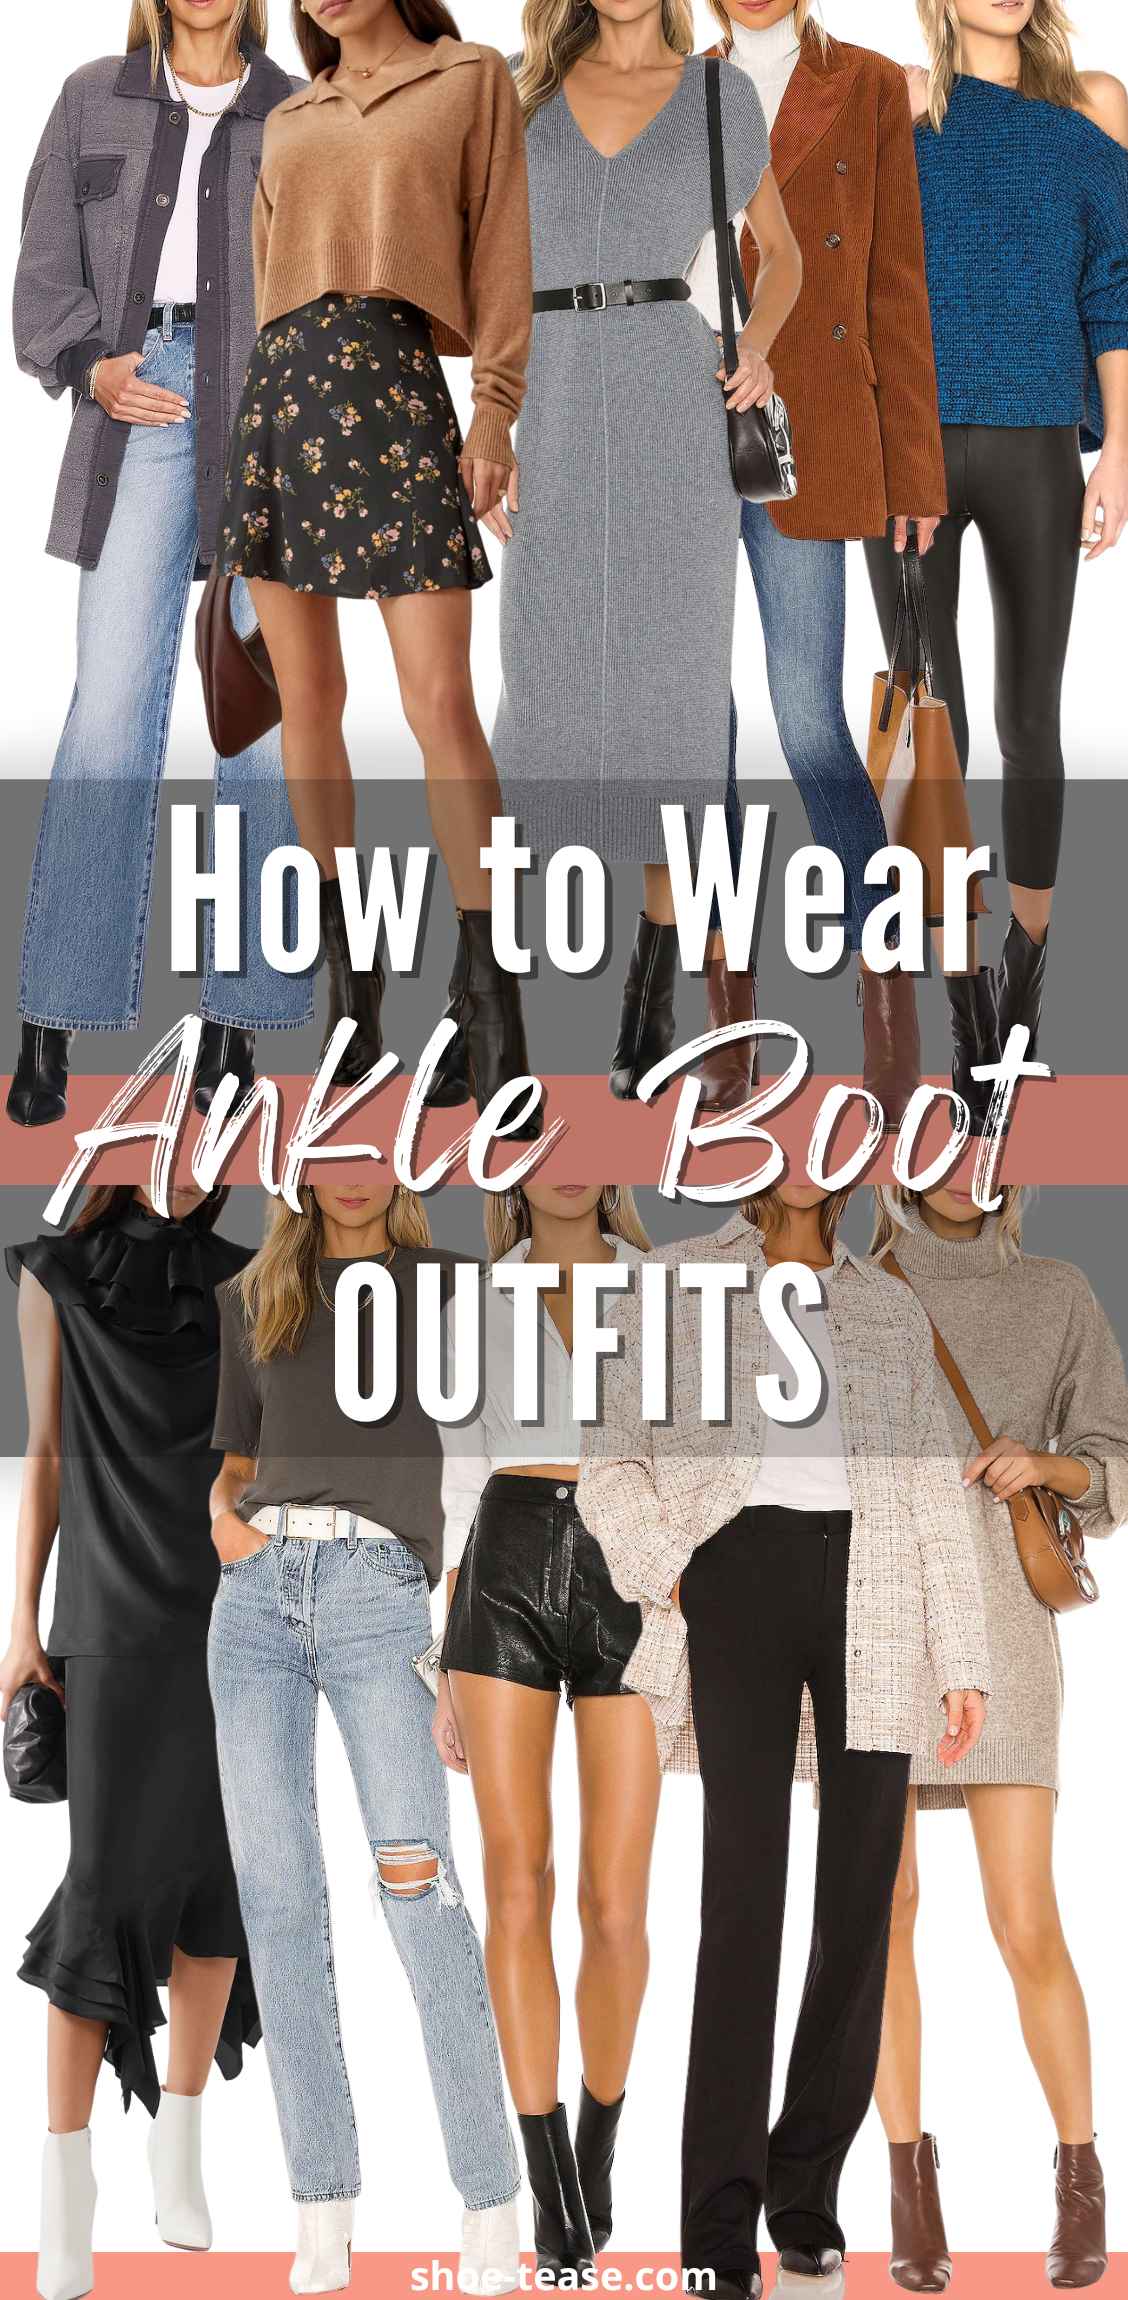 How to Wear Ankle Boots Outfits - A Women's Guide